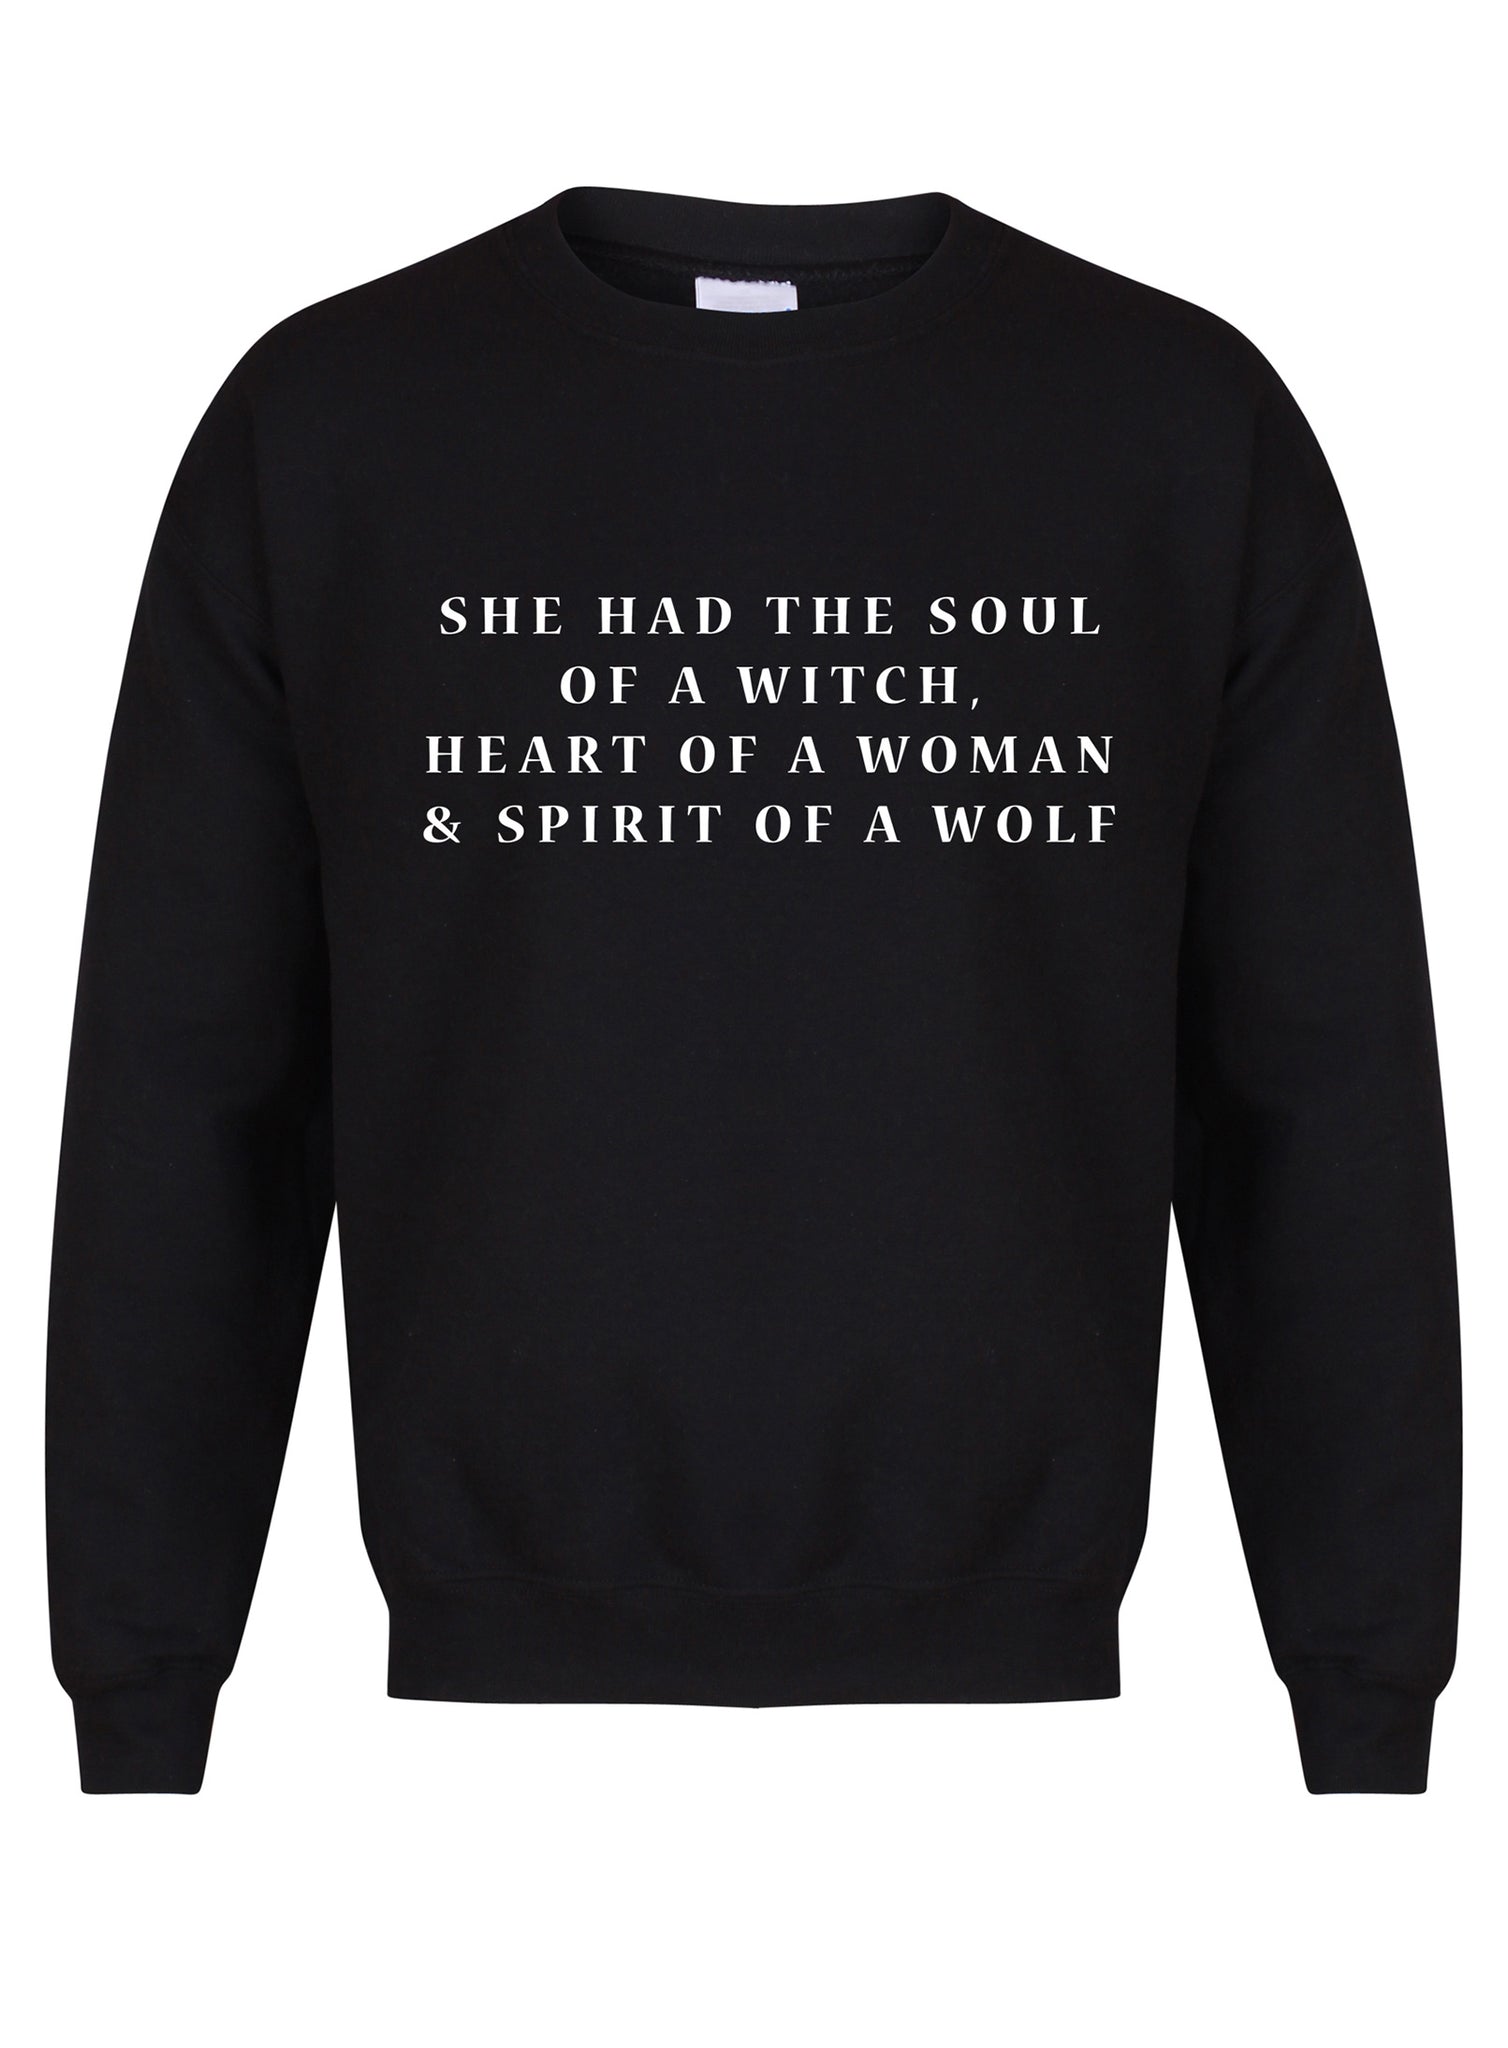 She Had The Soul of a Witch - Unisex Fit Sweater